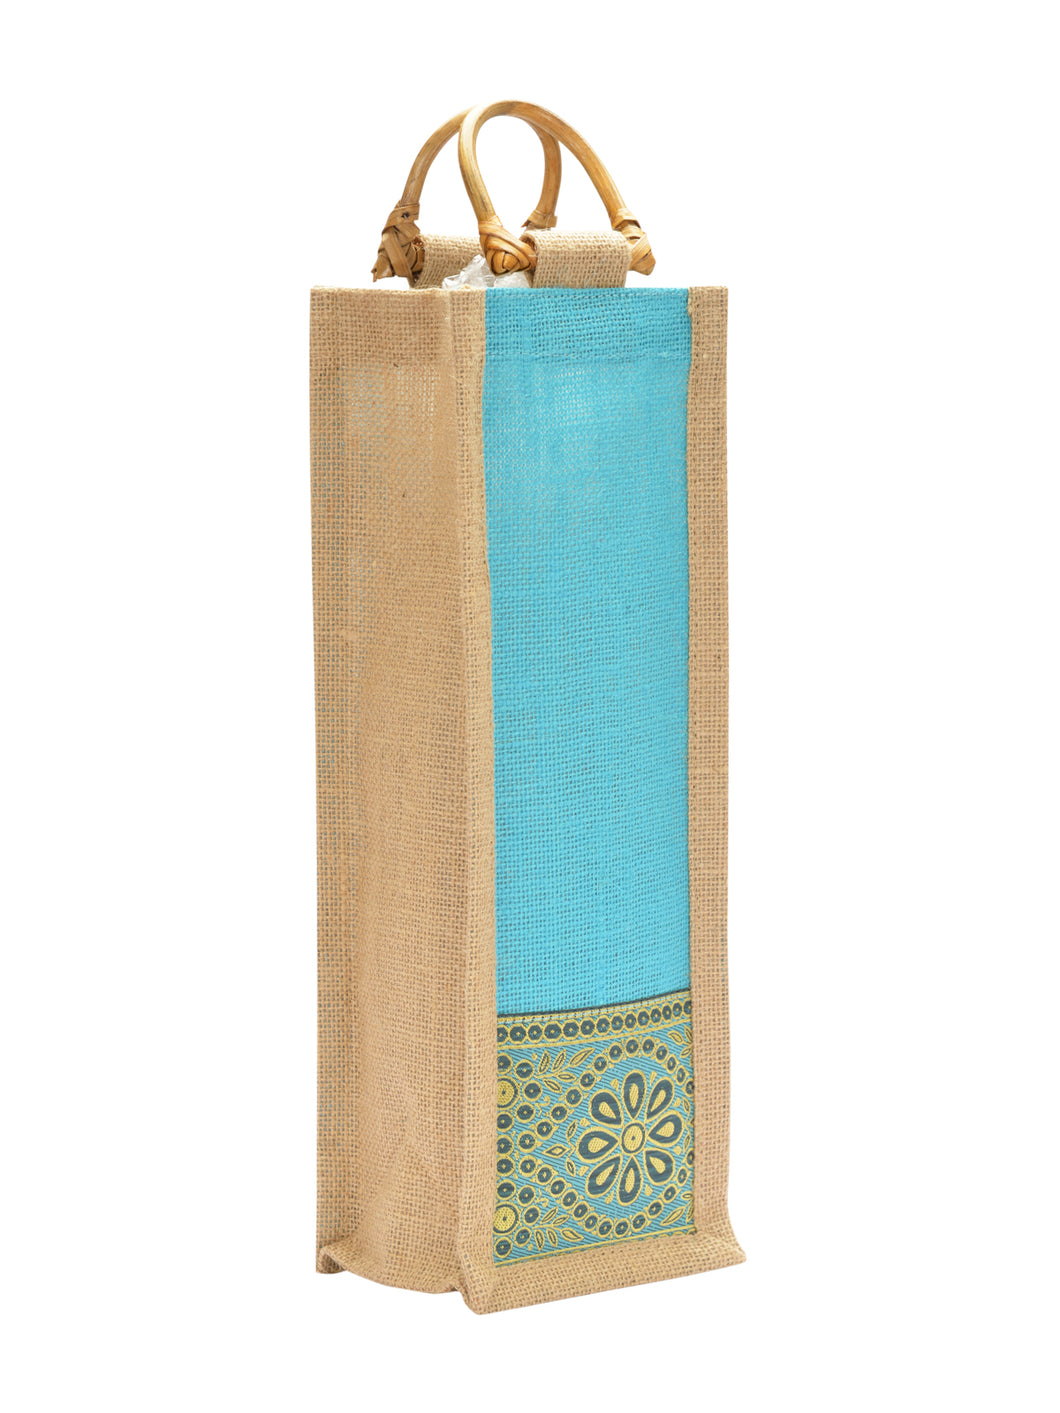 BOTTLE BAG WITH LACE / PRINT (B-010-TURQUOISE BLUE)